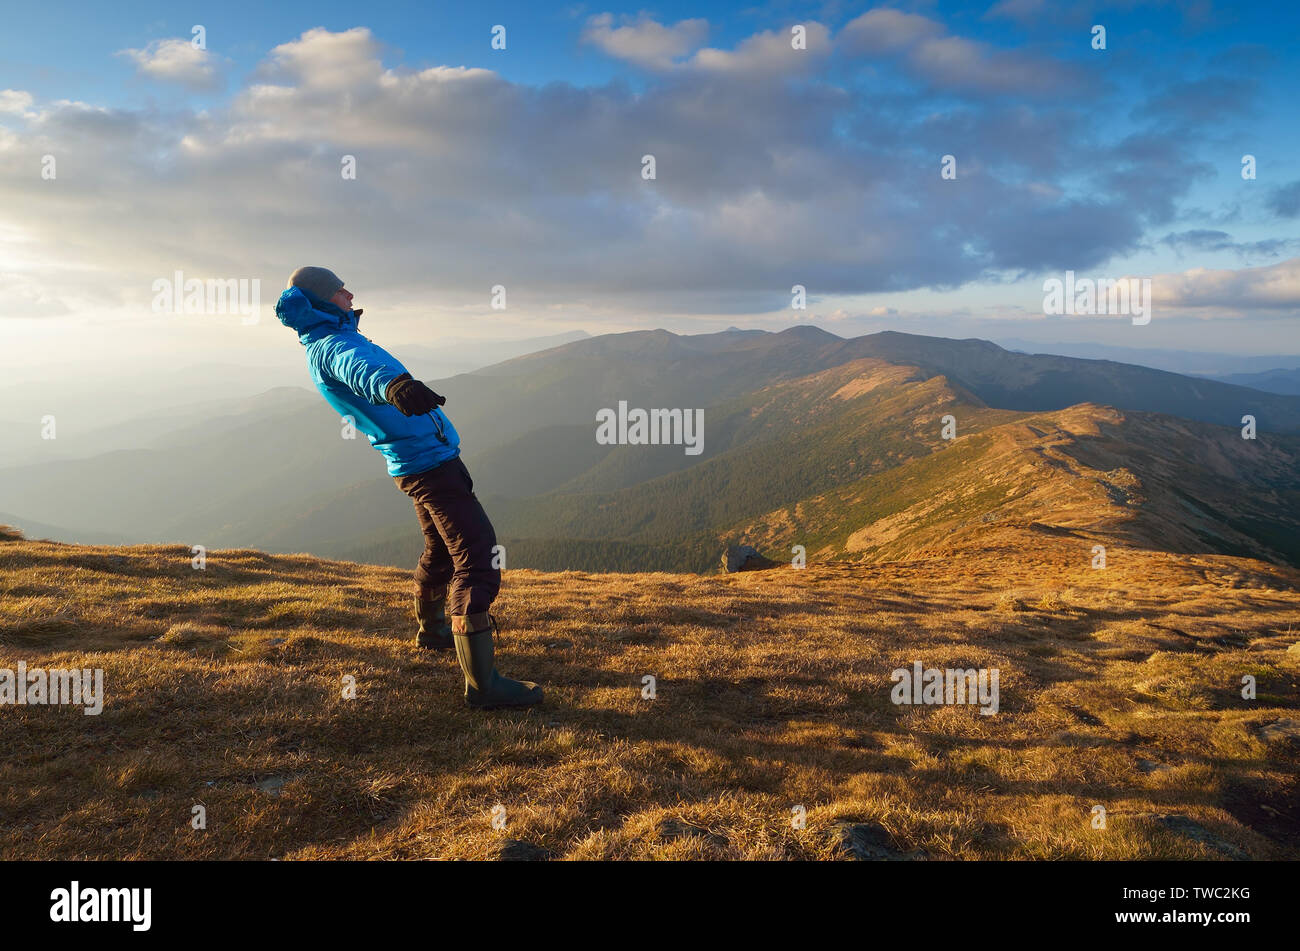 Man balances. Strong wind in the mountains. Autumn Landscape Stock Photo